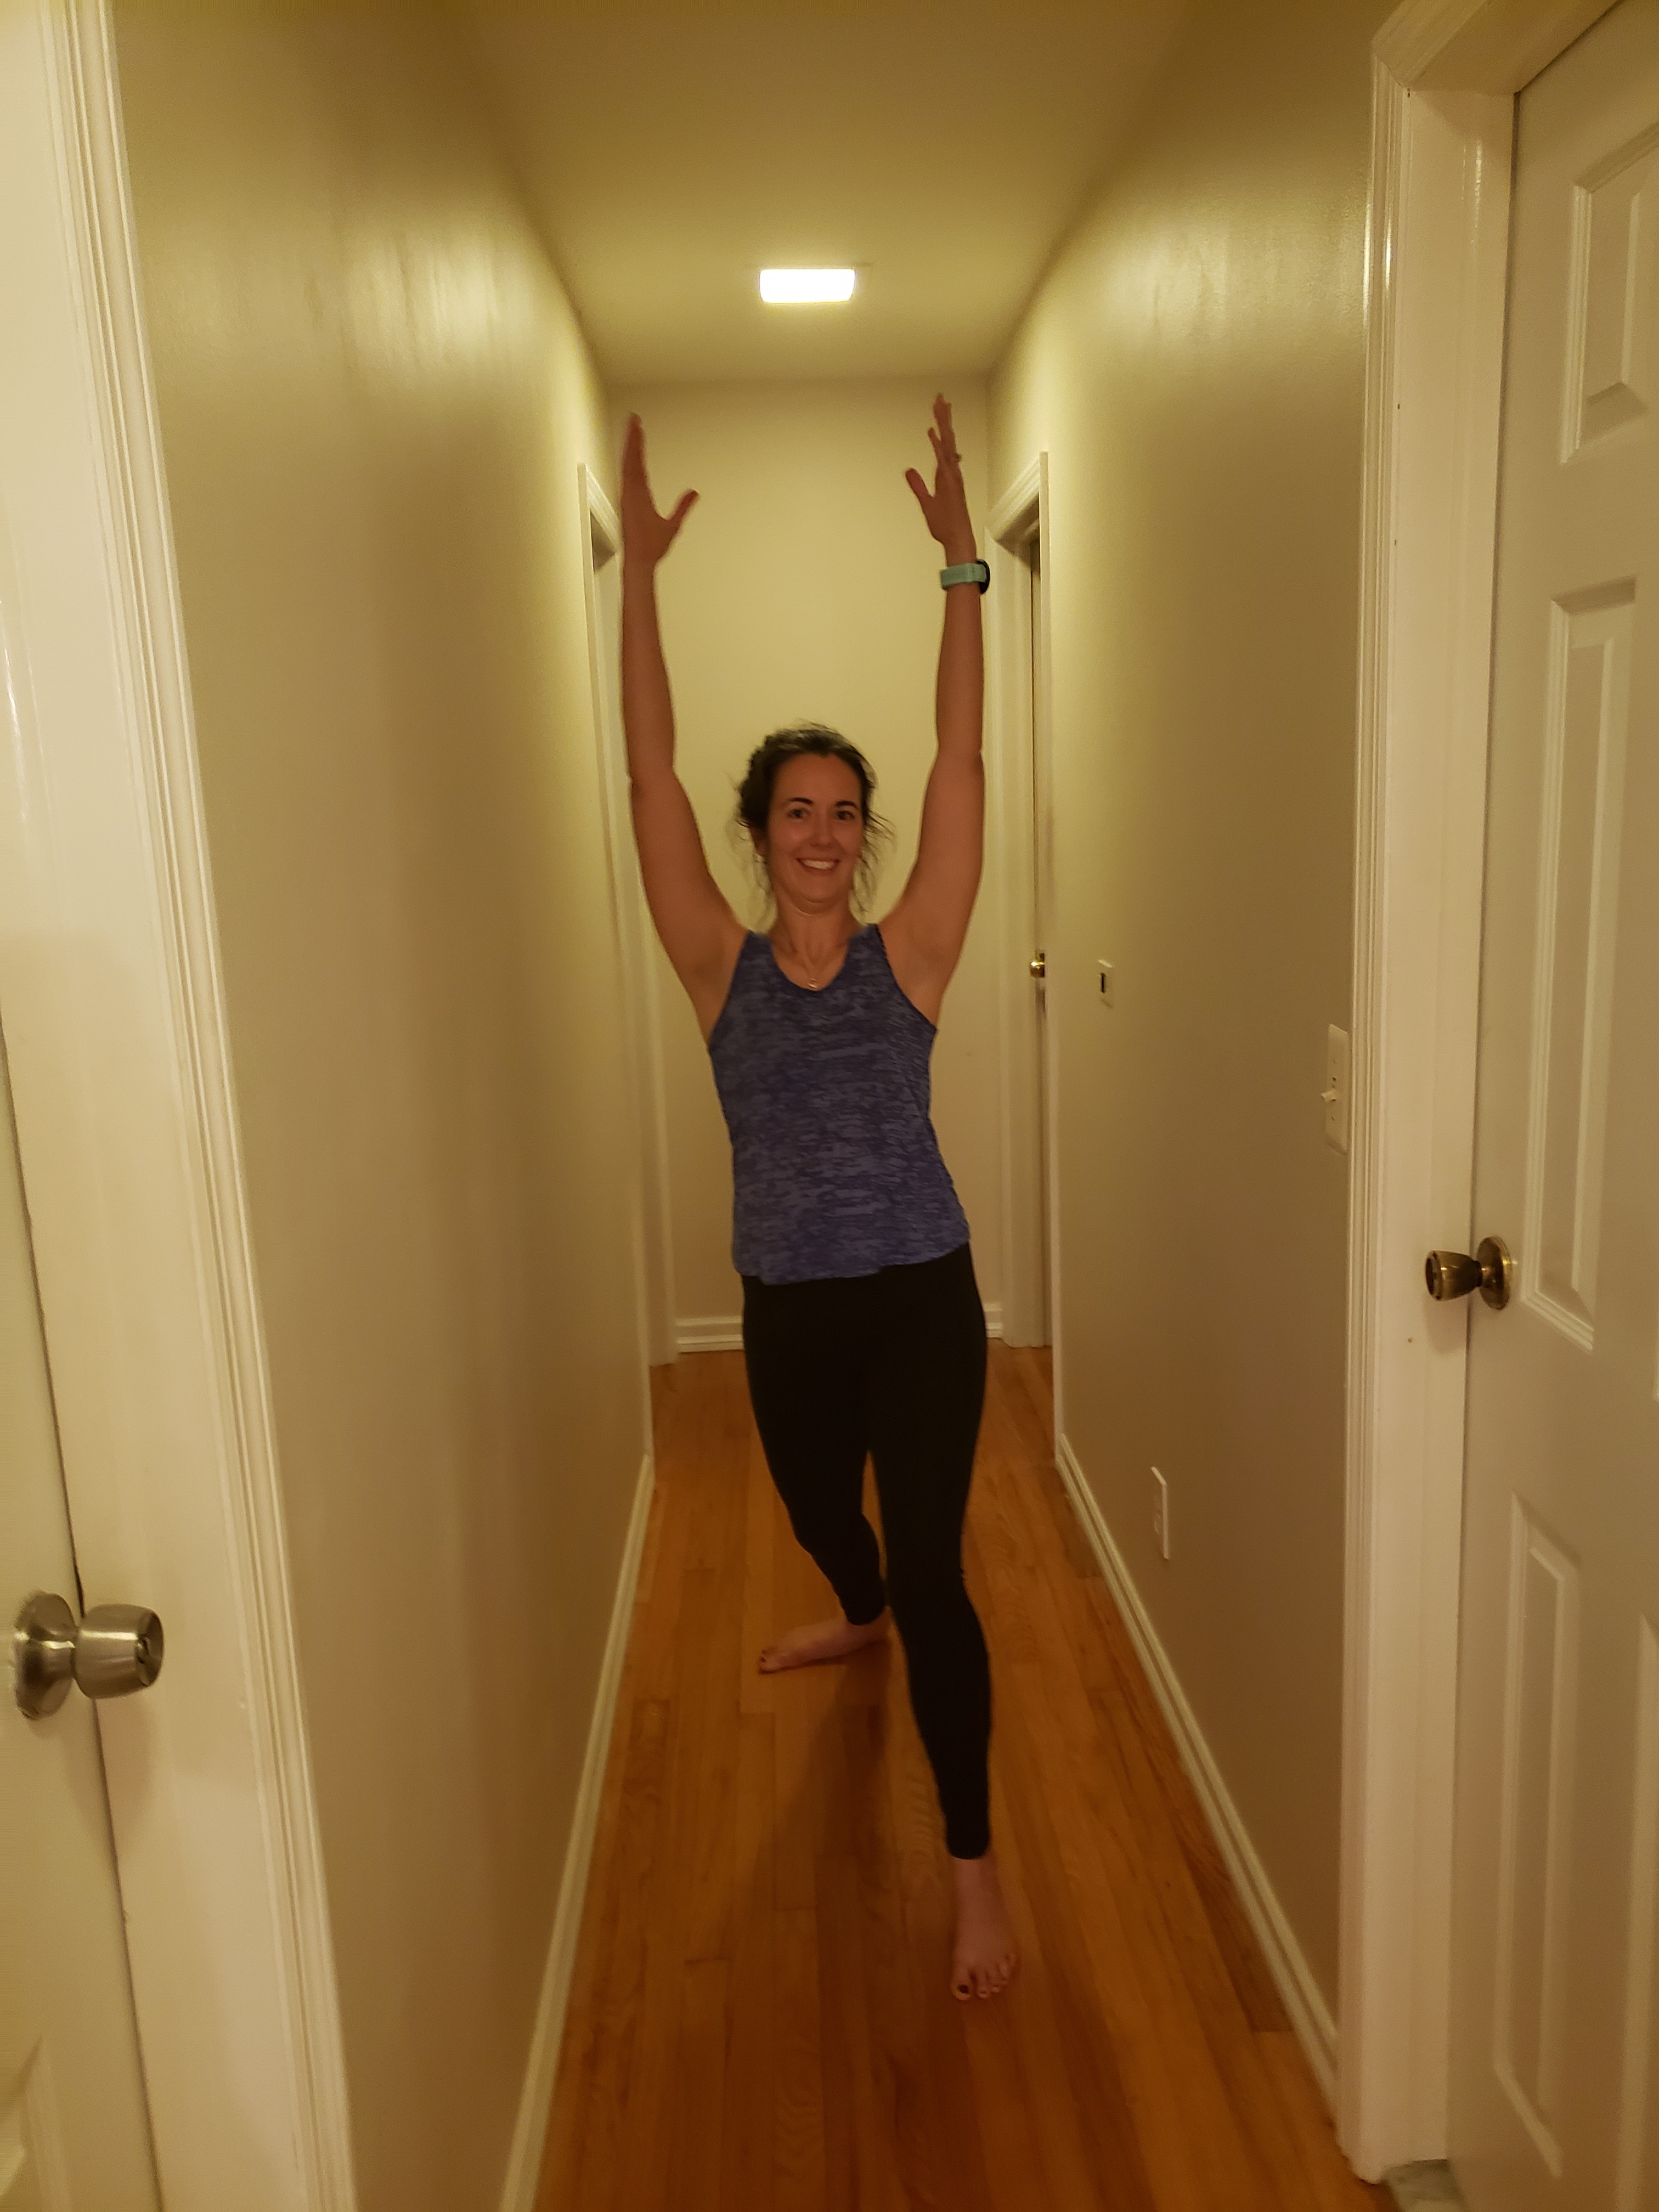 Kerry standing in the middle of her hallway with hands up in the air with her left foot forward in a lunge, warrior one position. She is wearing black leggings and a grown tank top.